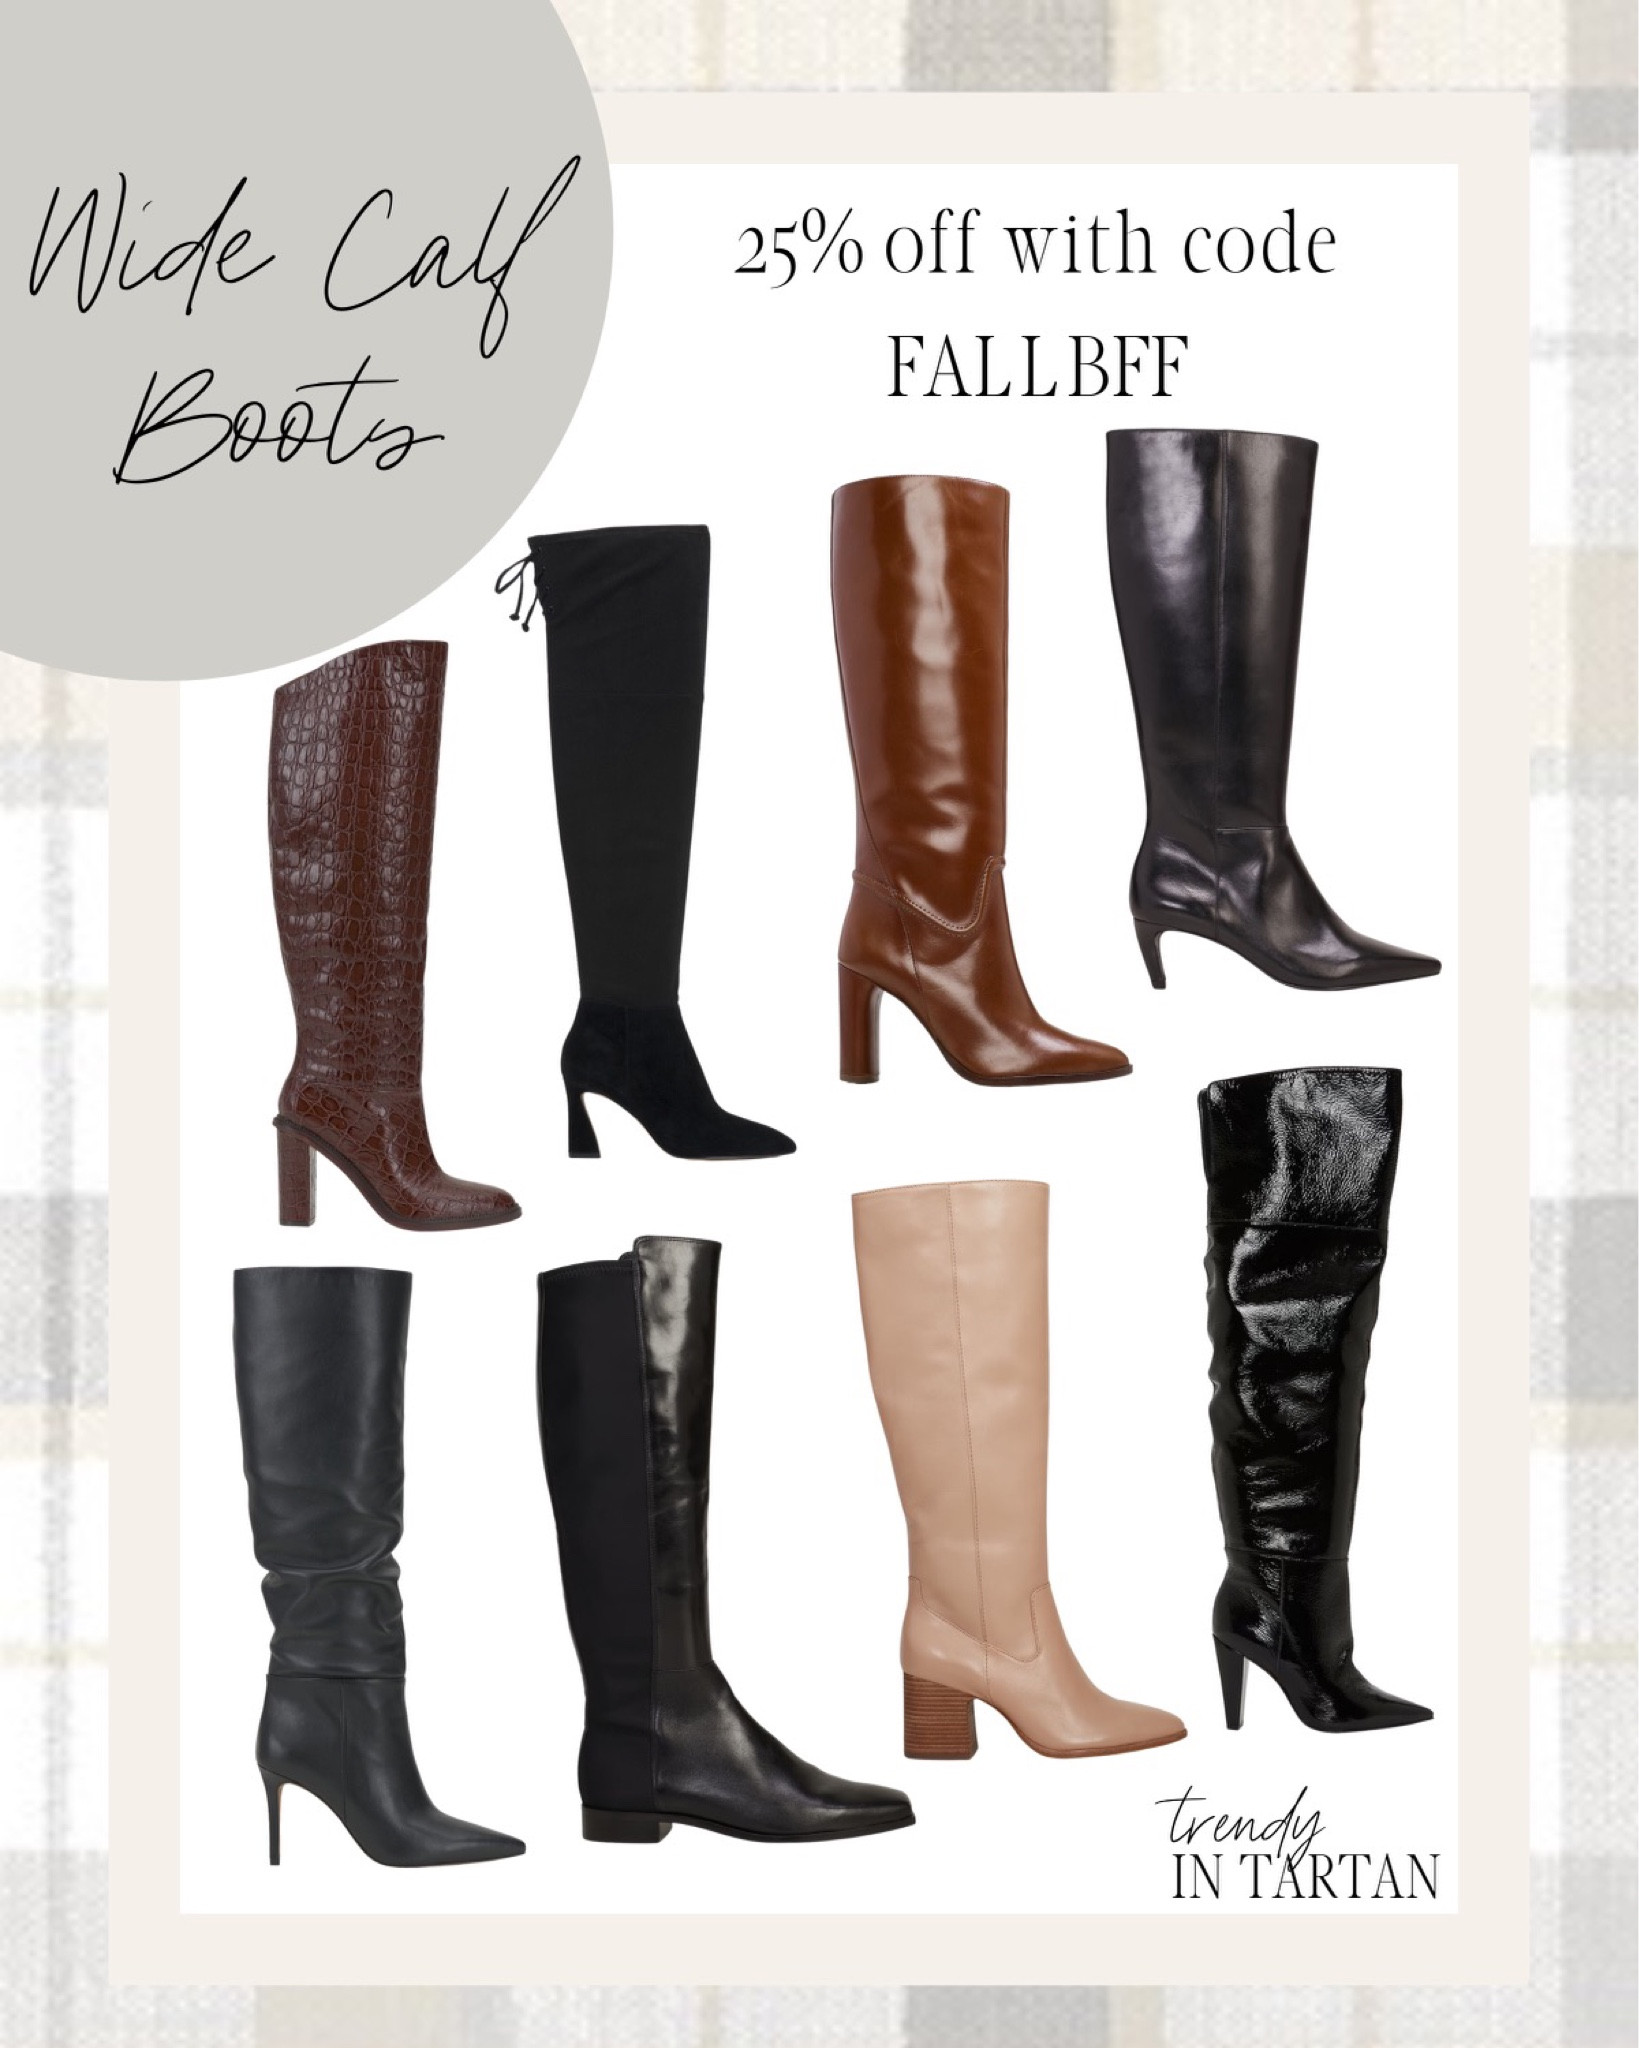 Vince Camuto Minnada Extra Wide-Calf Over-the-Knee Boot